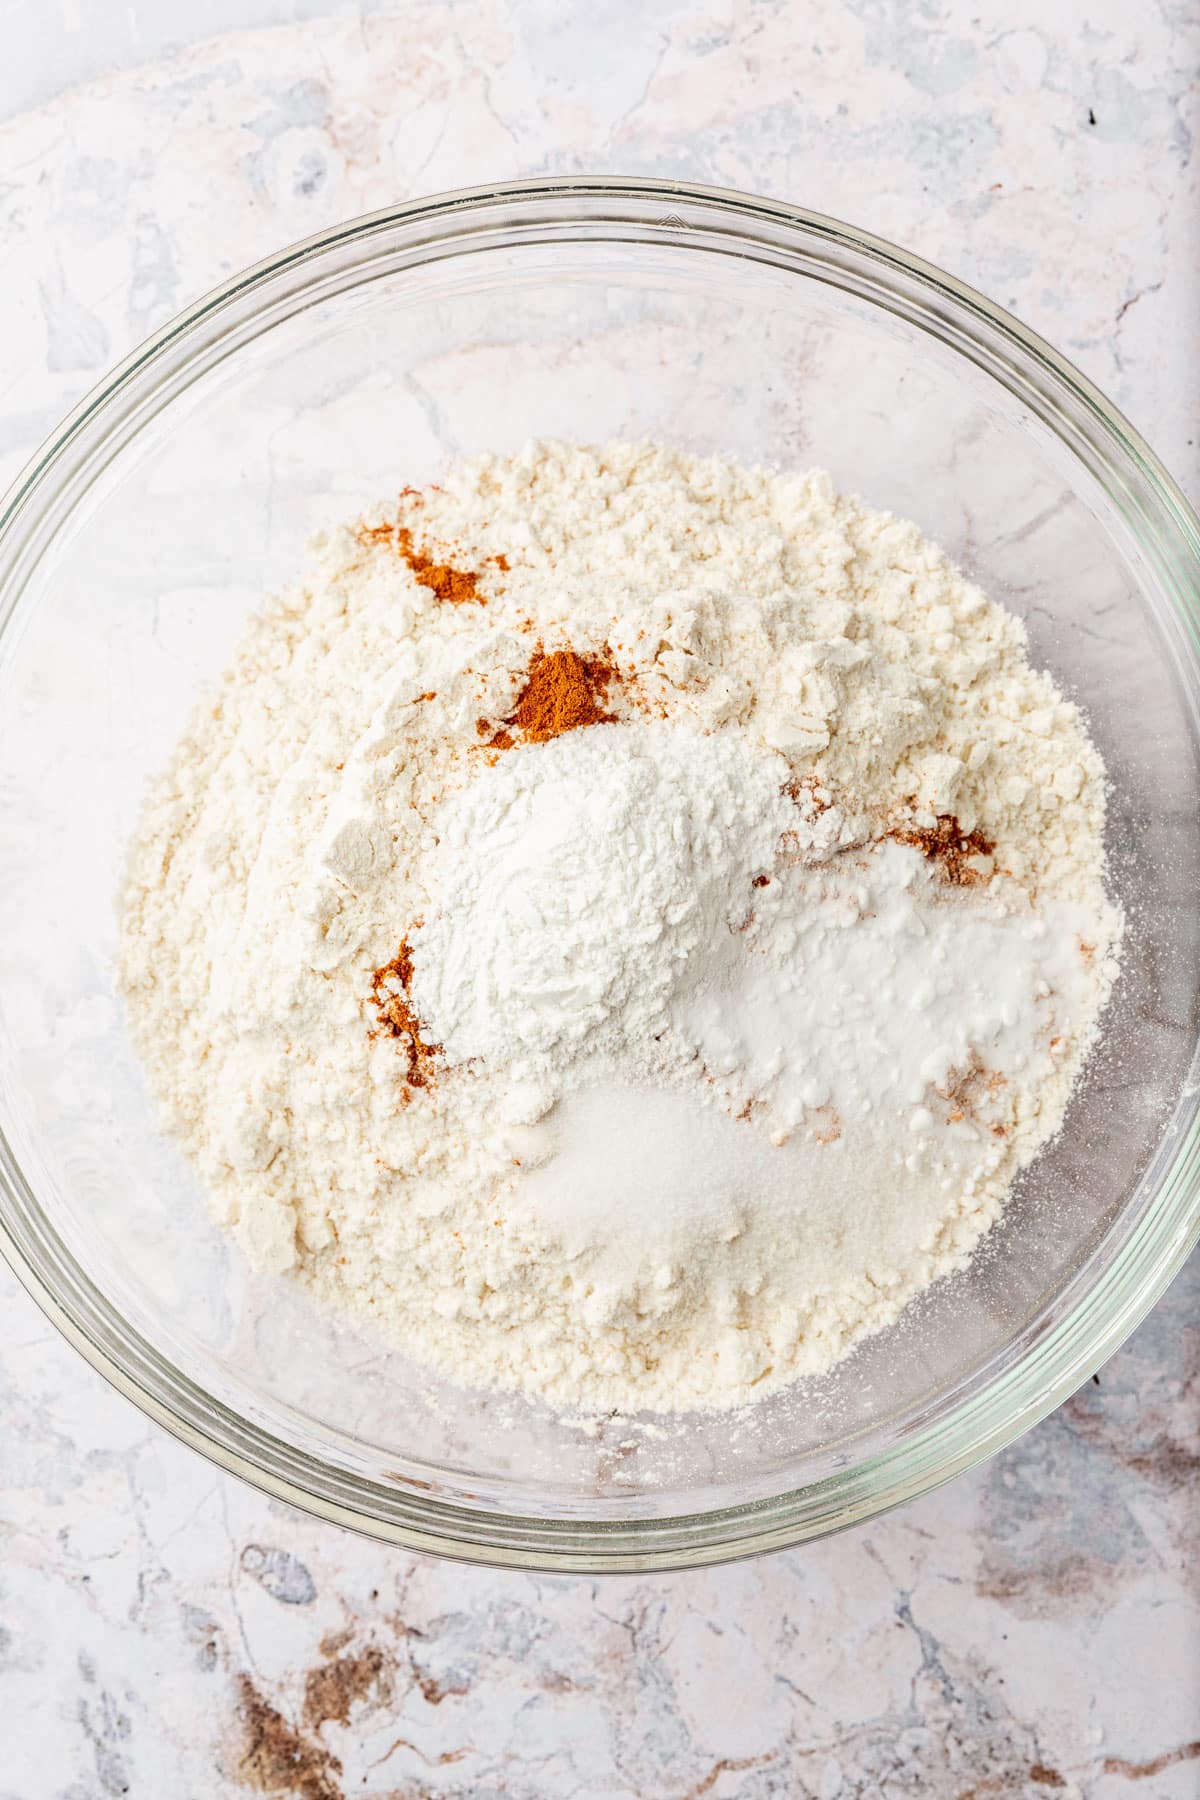 A glass mixing bowl with gluten-free flour, cinnamon, cream of tartar, salt, and baking soda in it before whisking together.